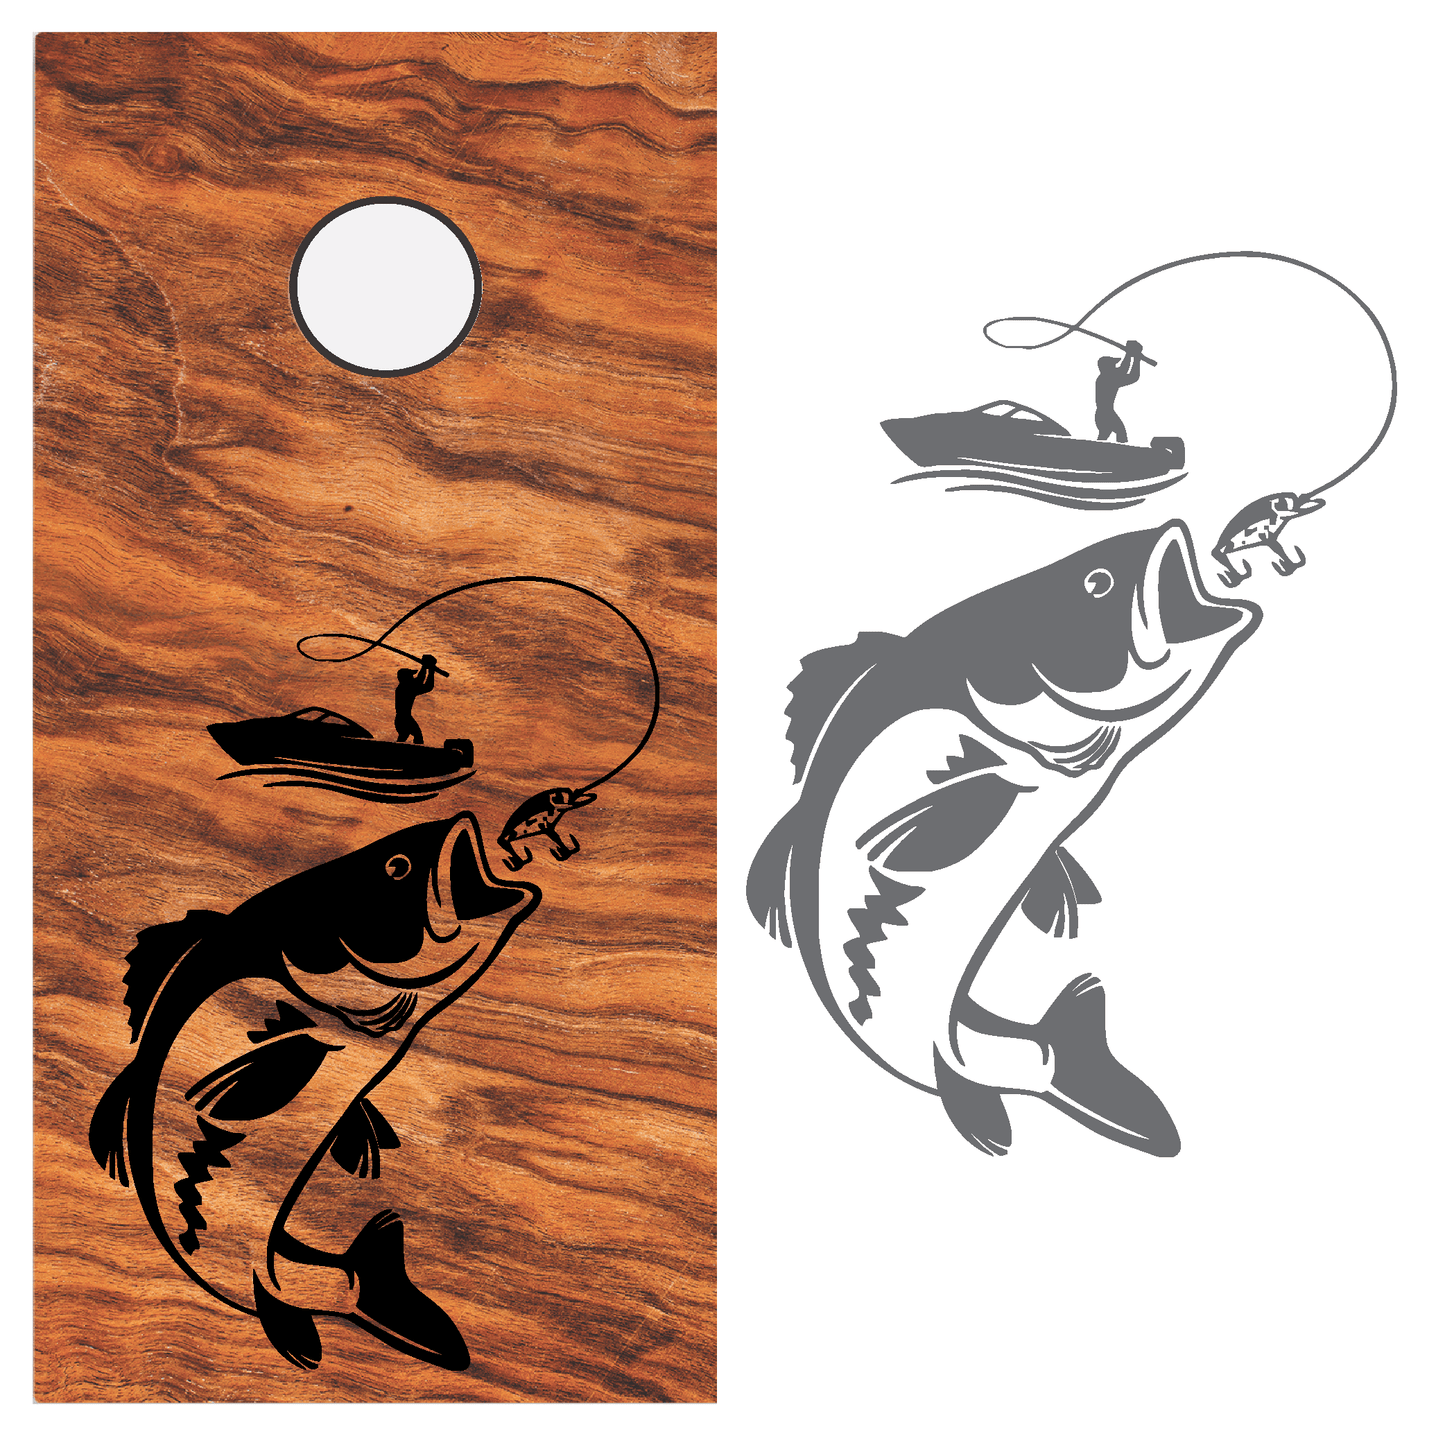 ShopVinylDesignStore.com Man Fishing From The Boat for Corn Hole Boards Wide A101 Shop Vinyl Design decals stickers